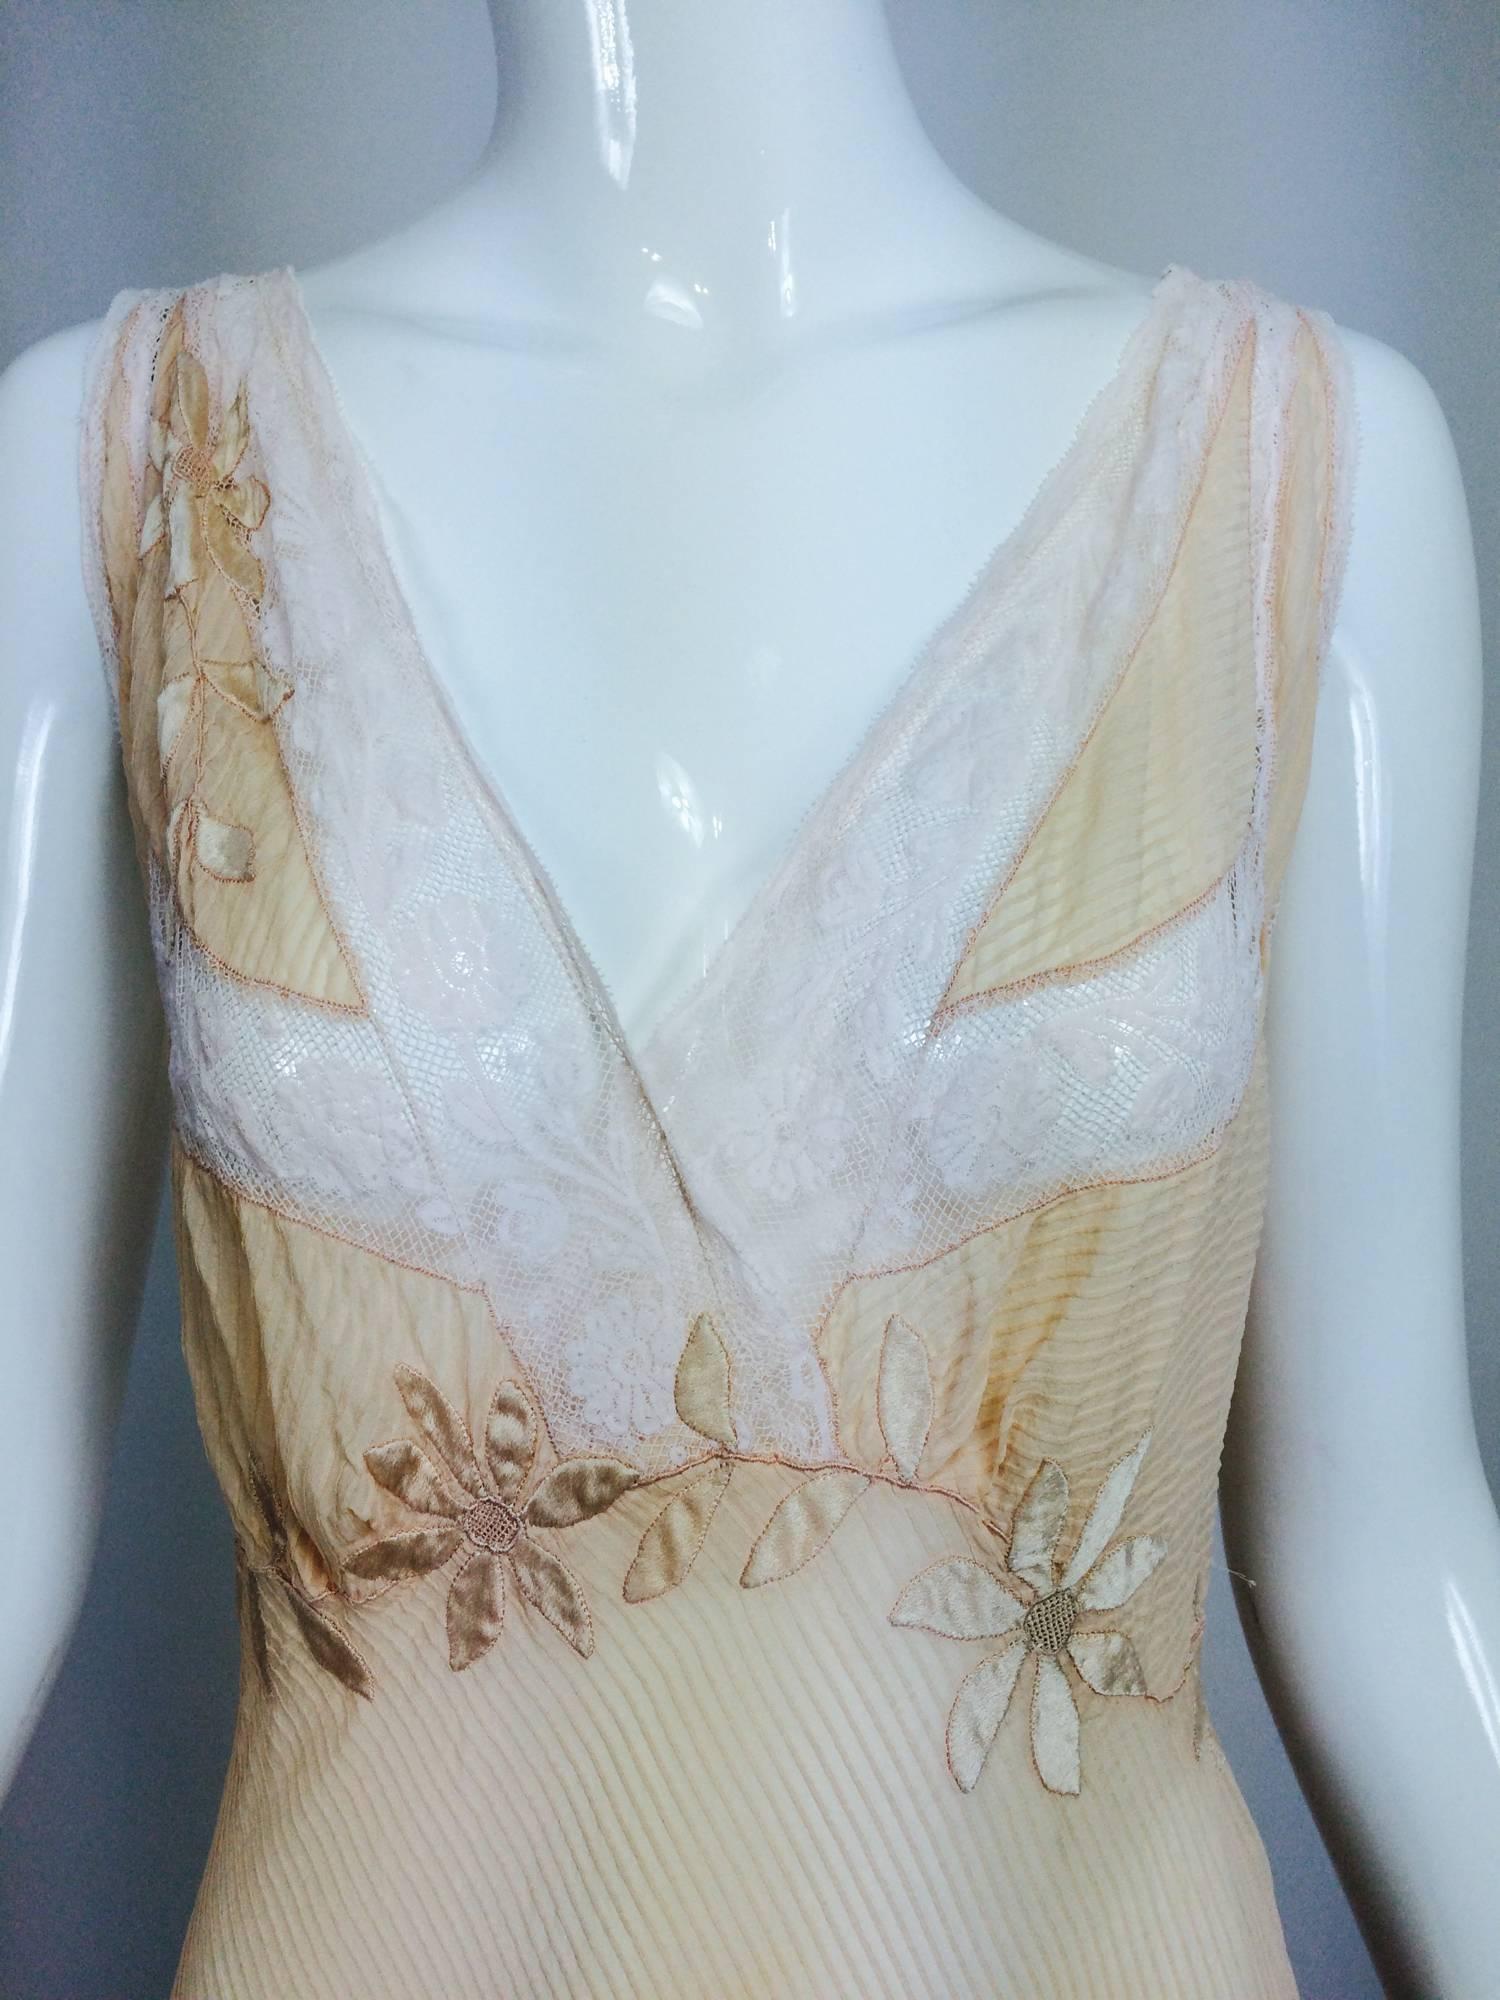 Hand made pale peach micro pleated bias cut silk chiffon night gown from the 1930s...Entirely hand stitched...The deep neckline and bust is trimmed in white Valenciennes lace...Beautiful appliques of silk satin in the shape of flowers wind around